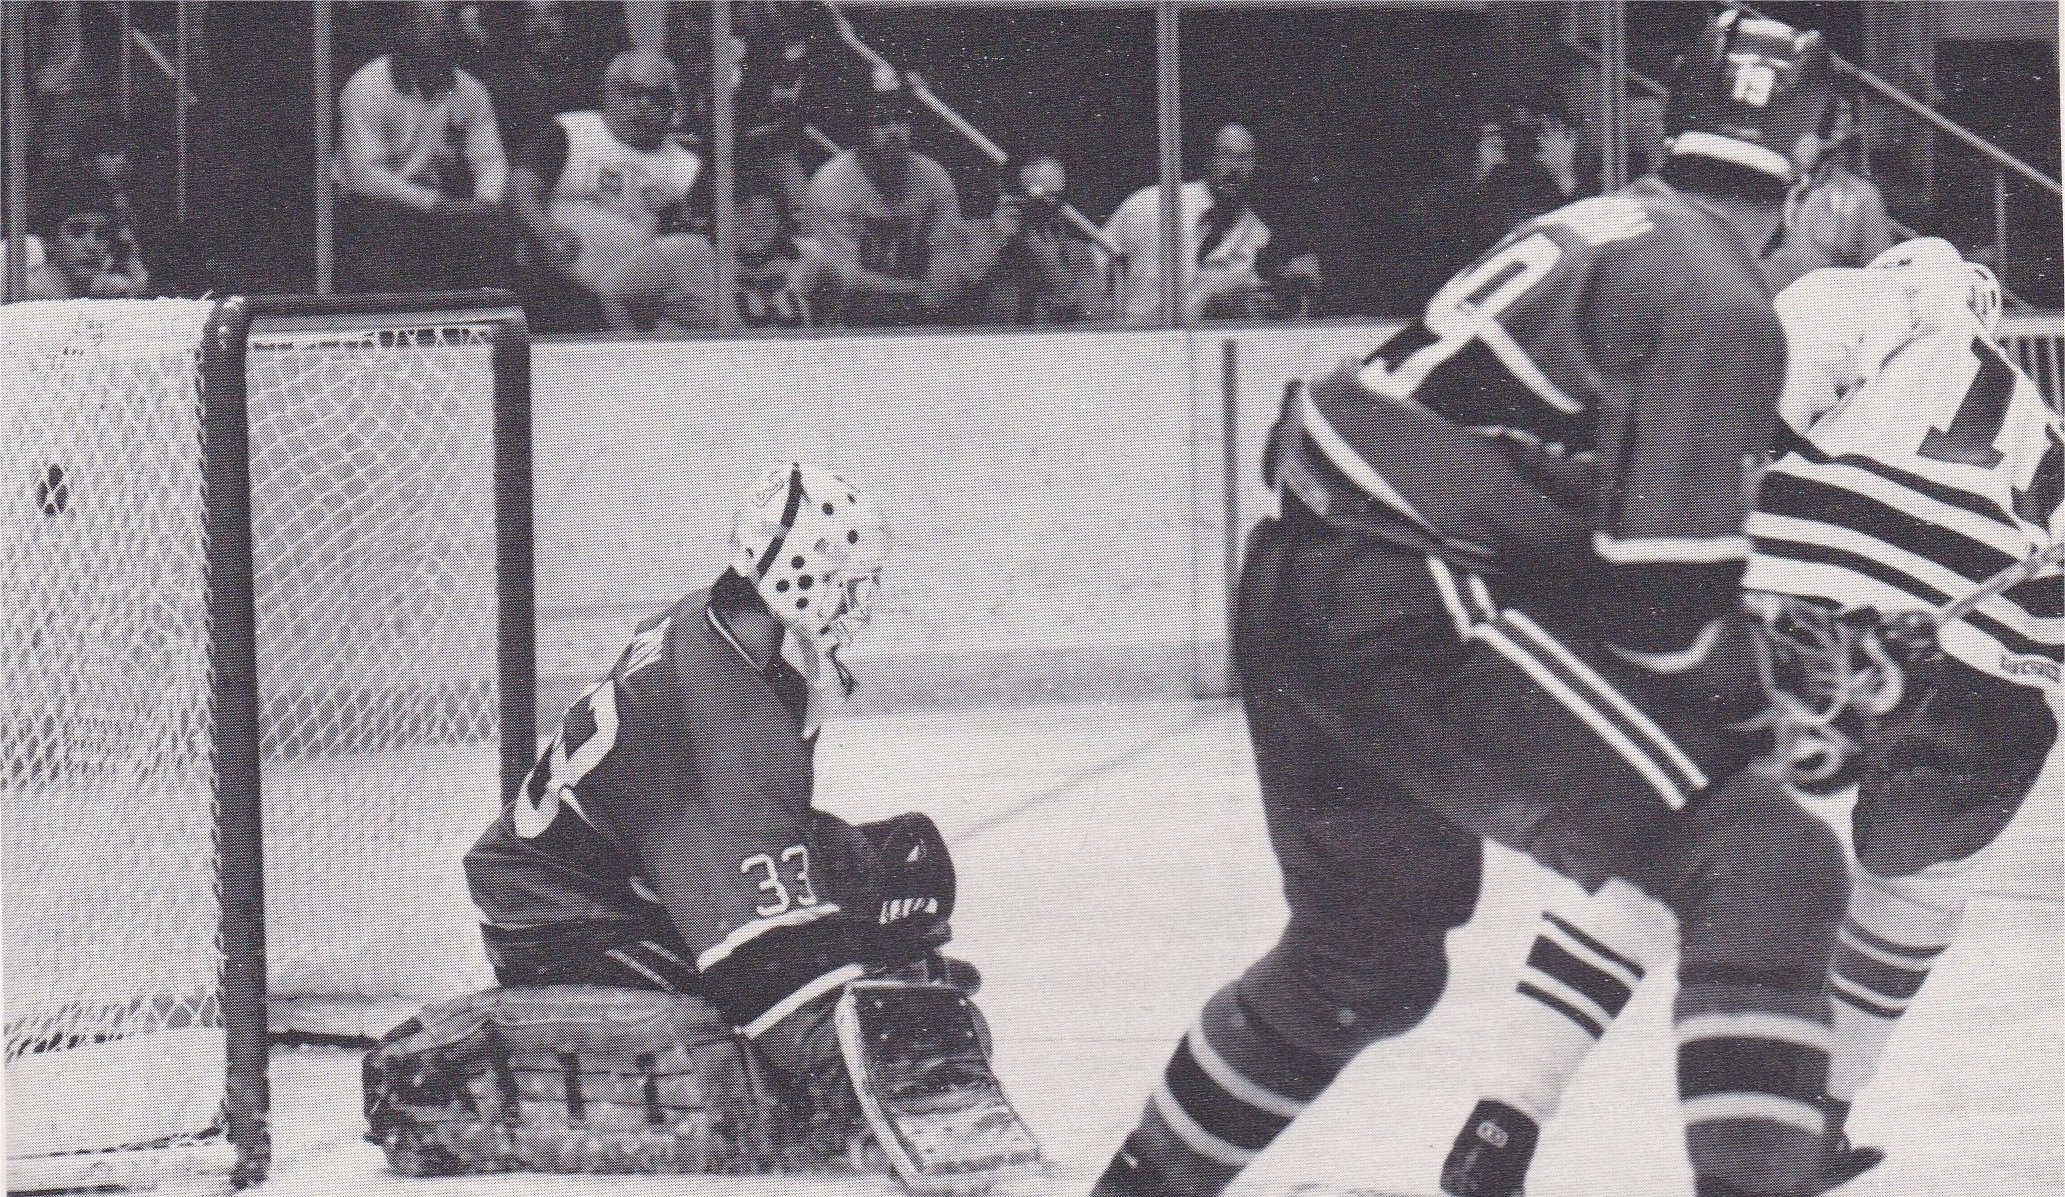 Kevin Dineen beats Patrick Roy for the OT game winning goal in game four of the 1986 Adams Division Finals